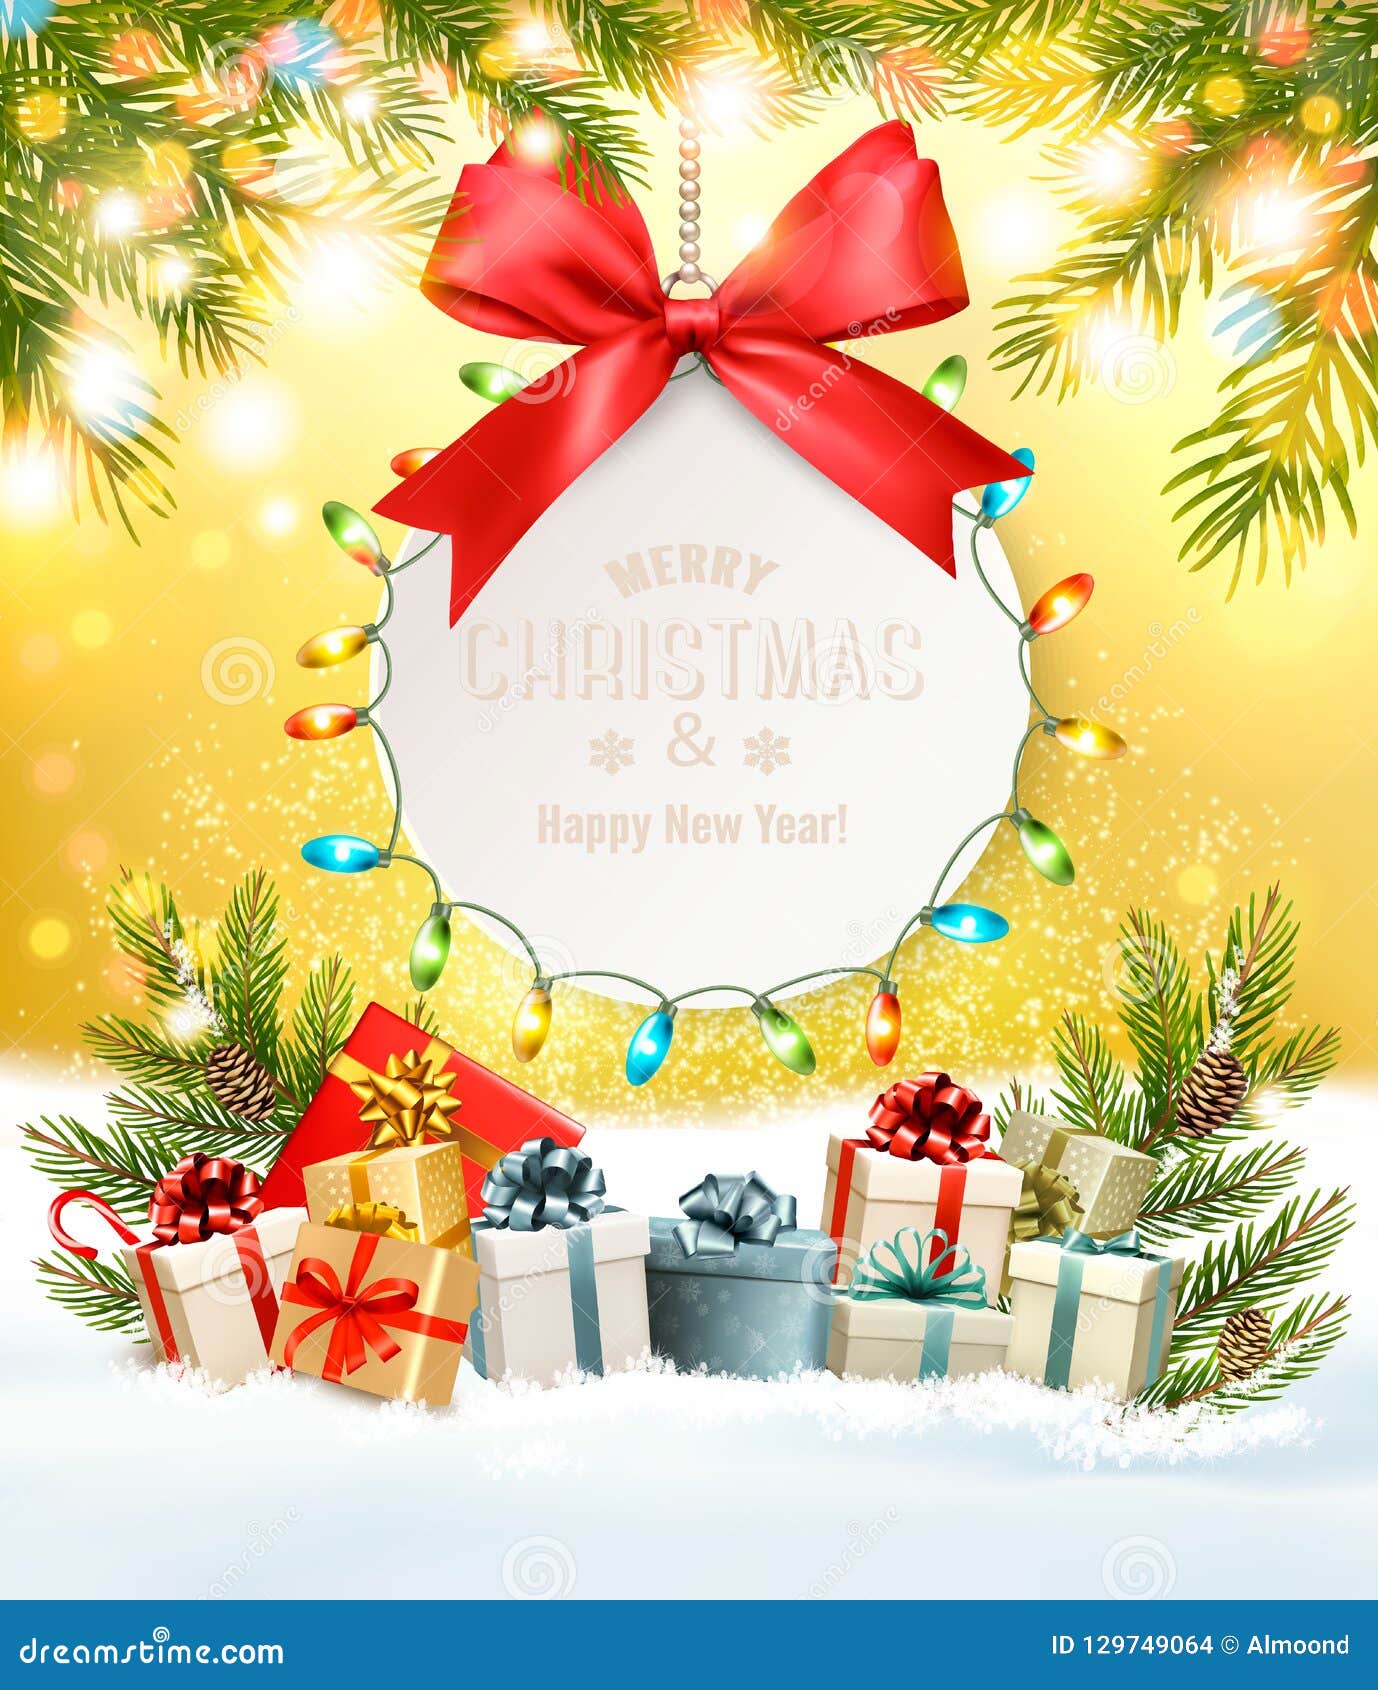 Holiday Christmas Background with a Gift Card and a Presents. Stock ...